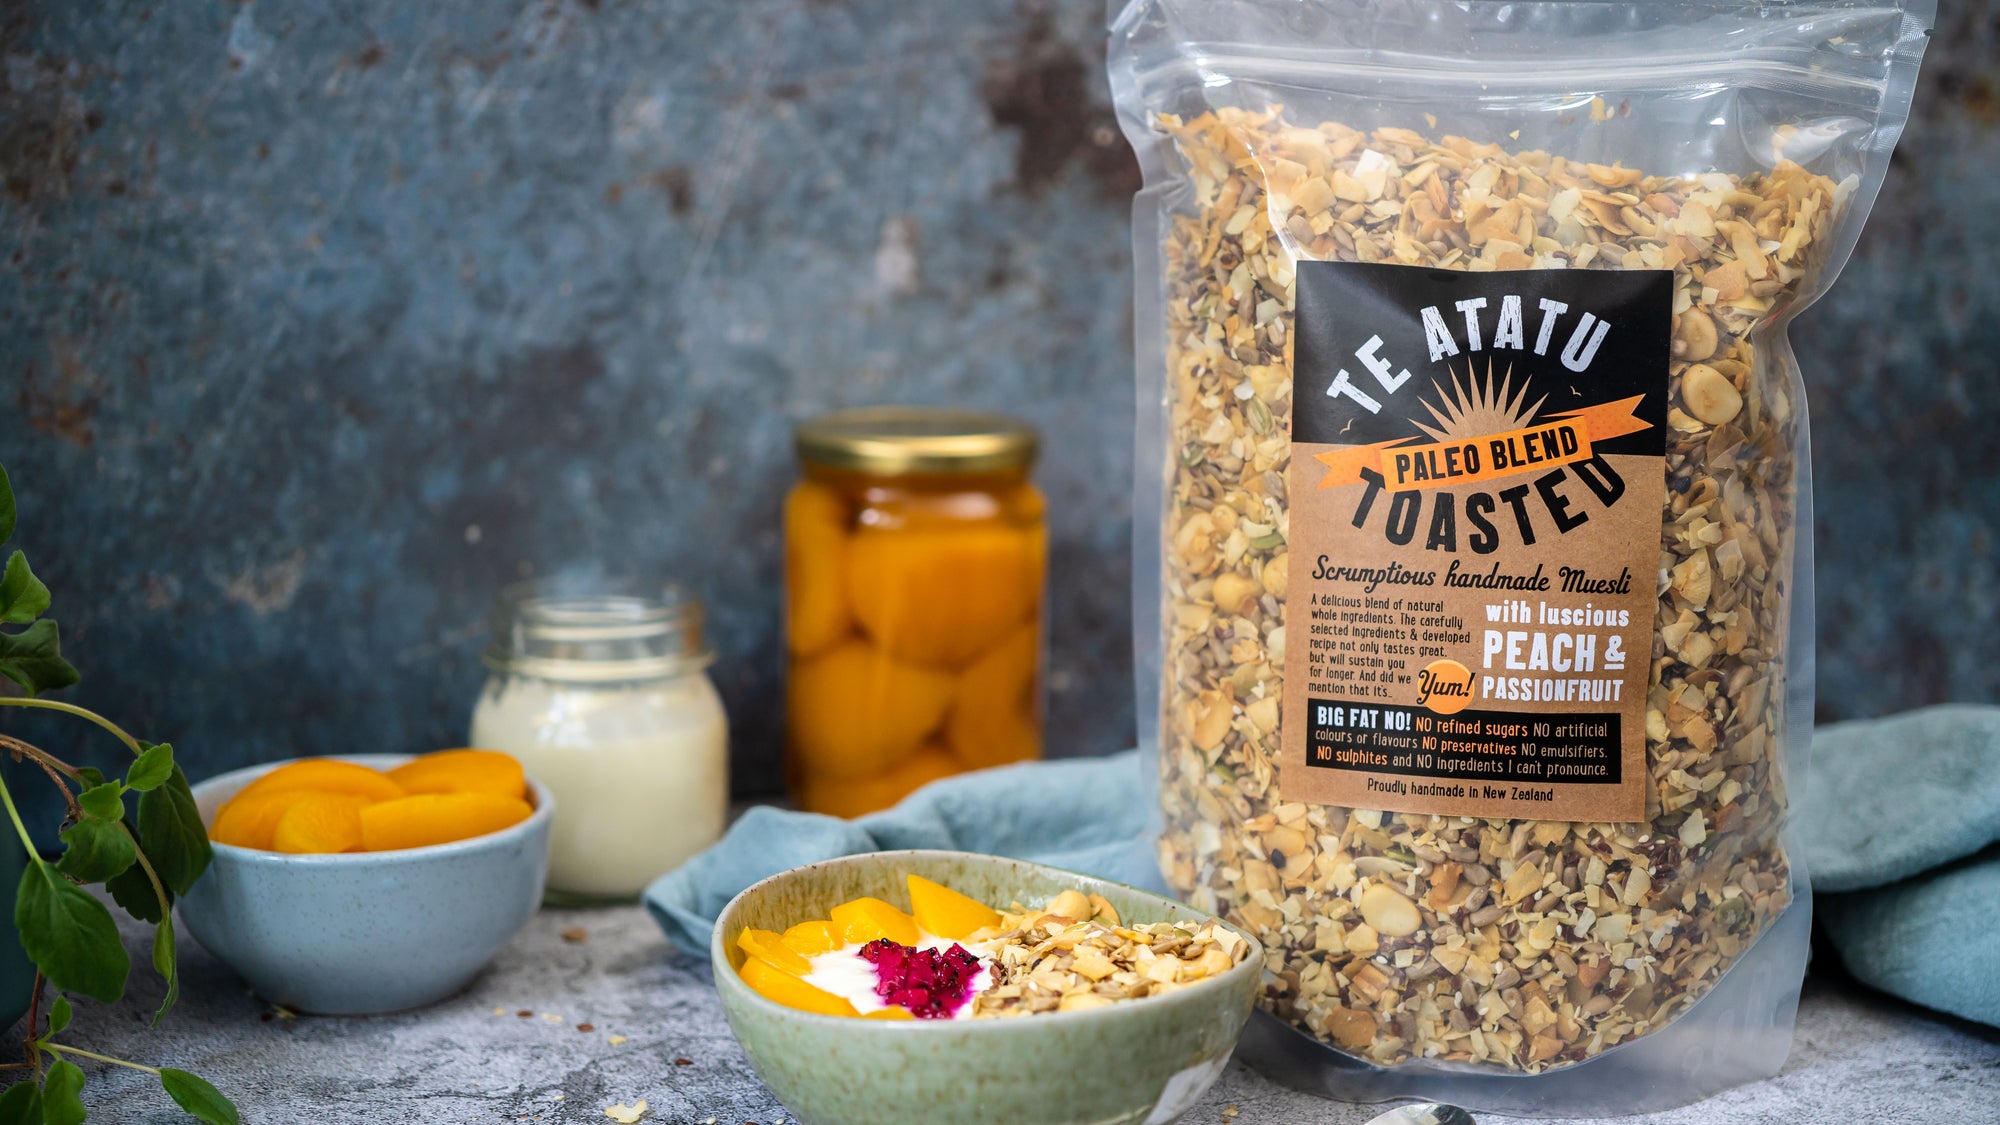 Te Atatu Toasted - healthy low sugar breakfast cereals that will keep you full up until lunchtime. Packed with seeds, nuts and wholegrain ingredients